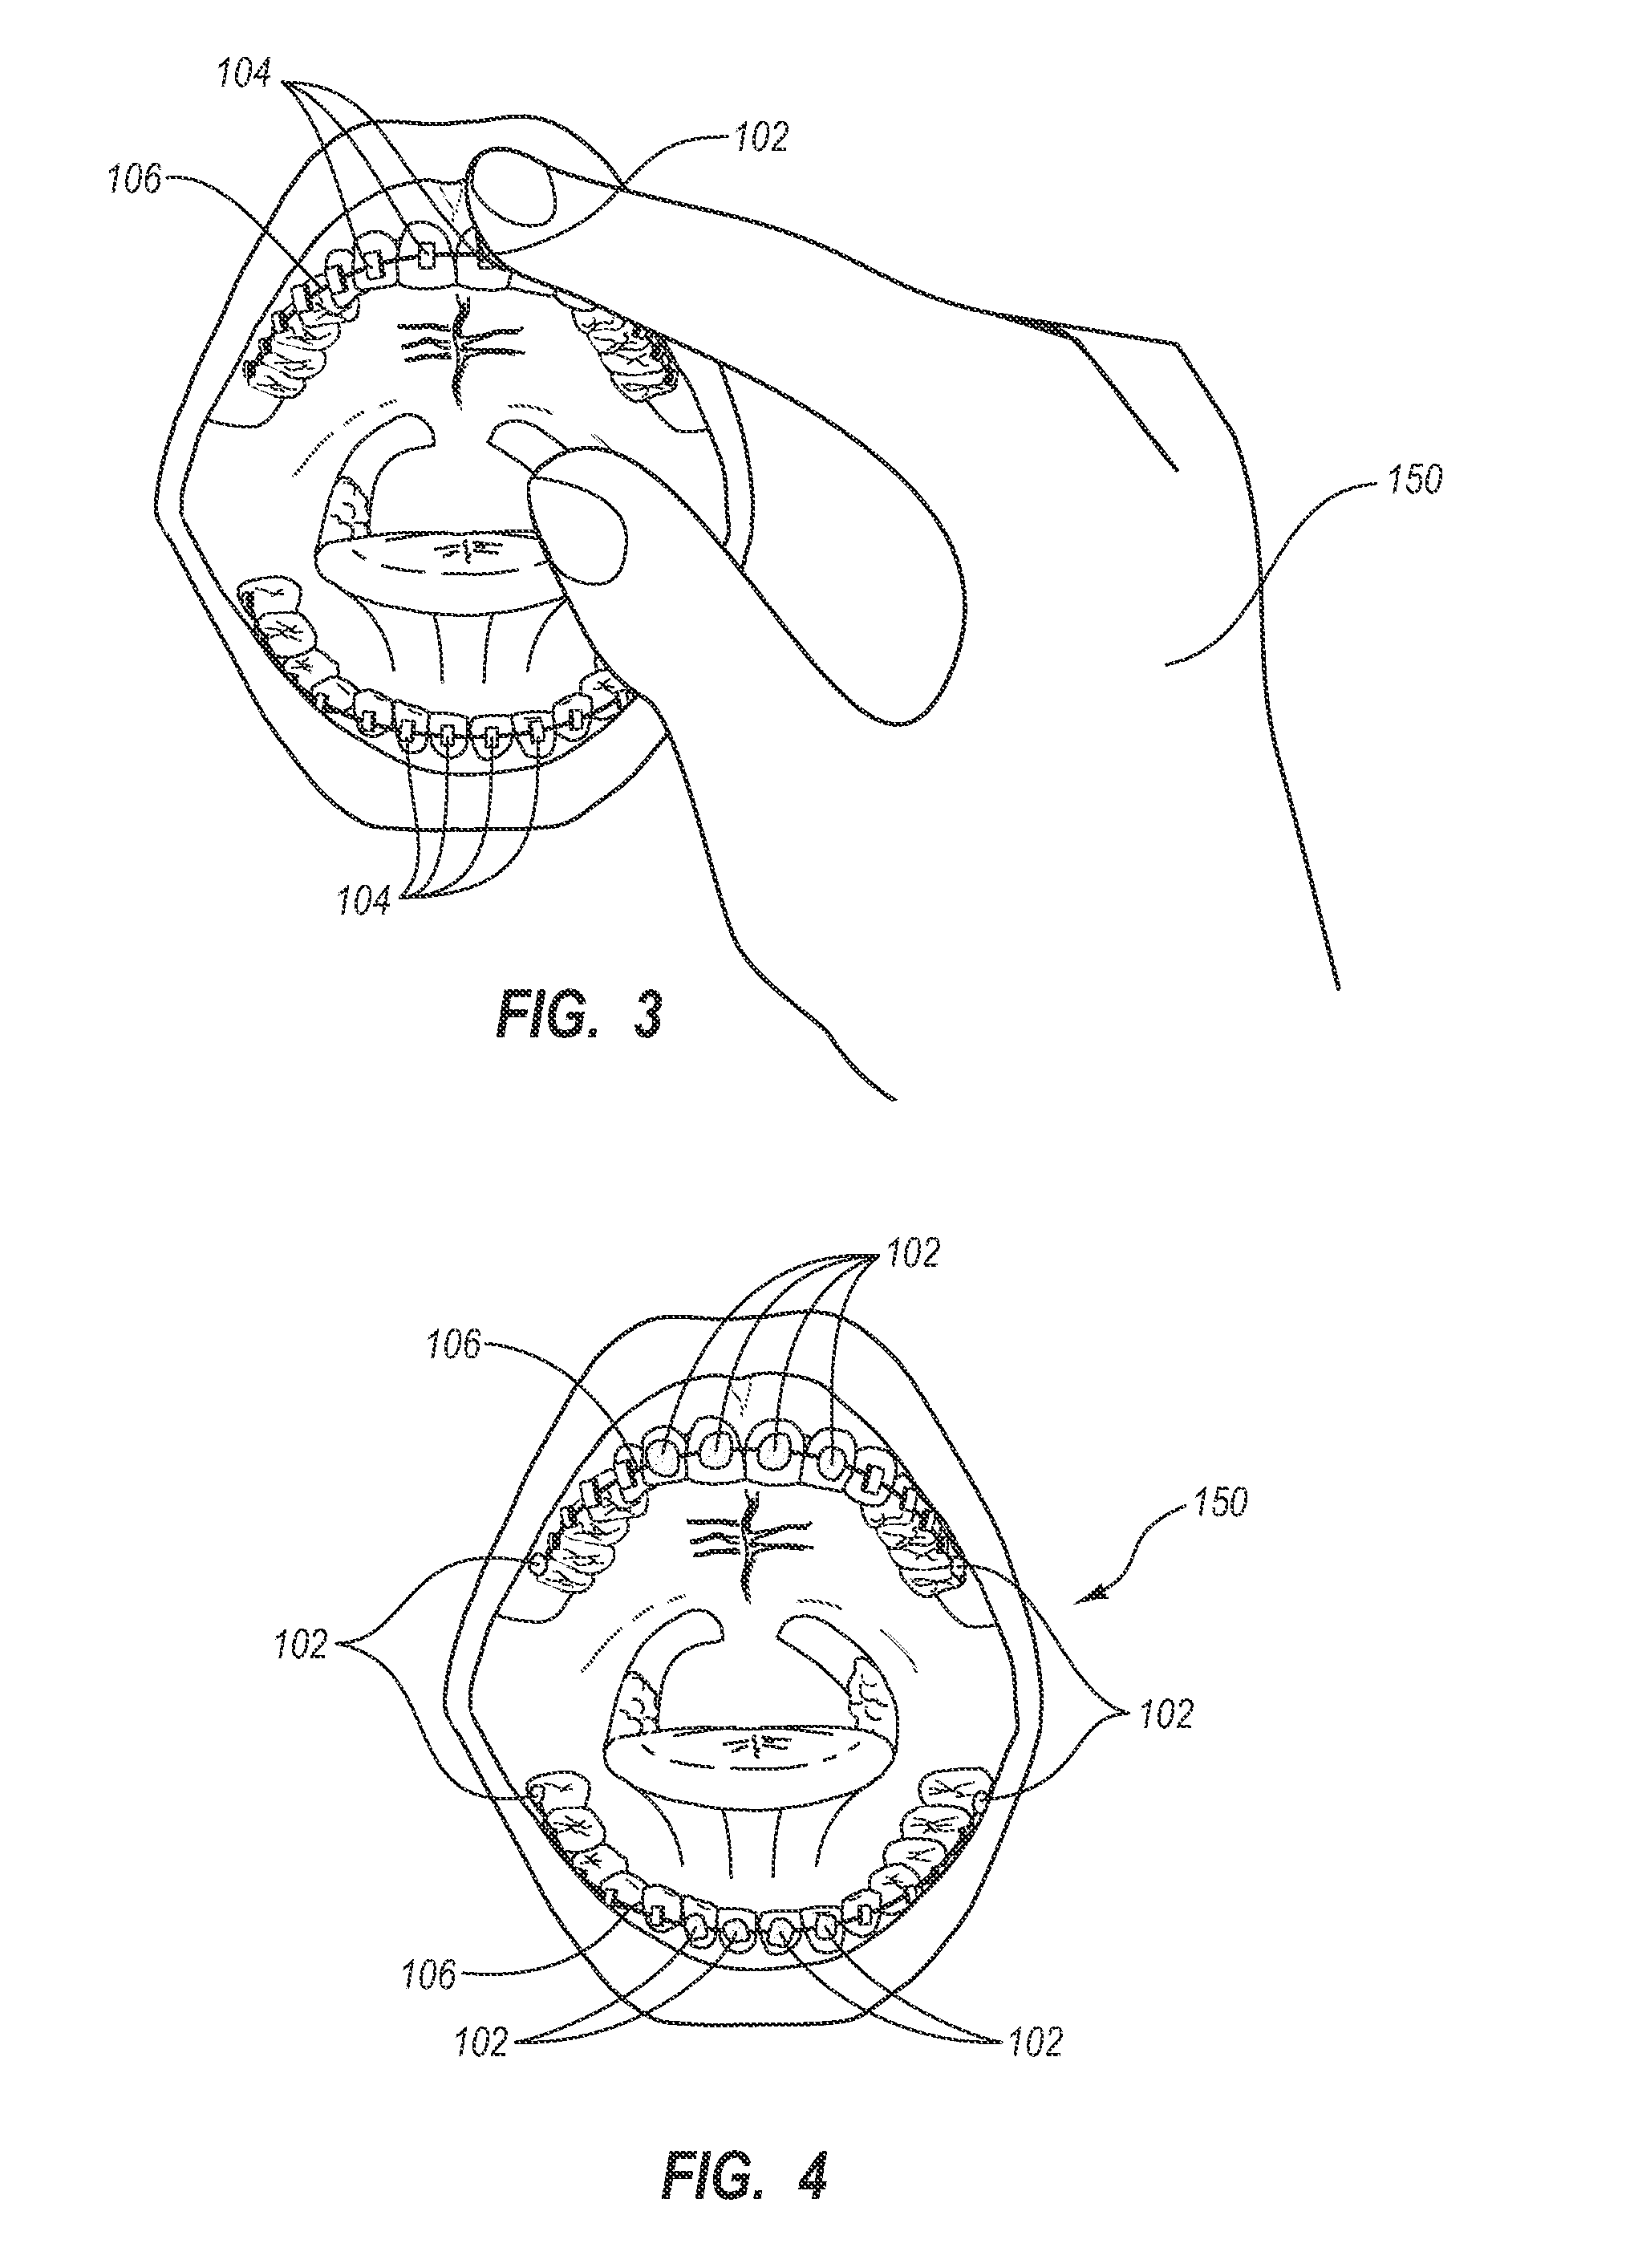 Polymerizable temporary coating methods and systems for intraoral devices